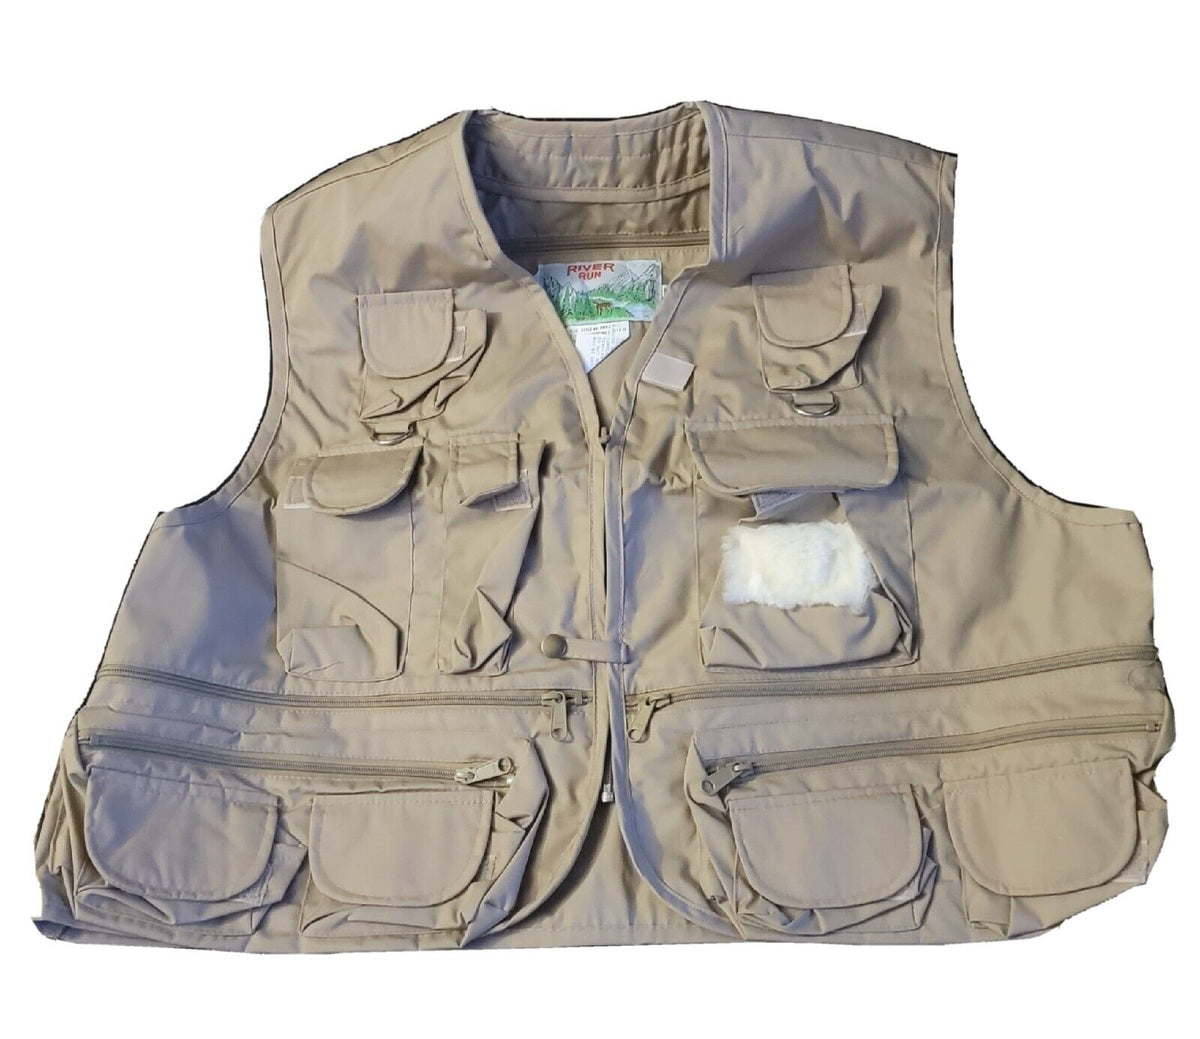 River Run Fishing Vest, XXL, Brown Yellowstone Style # R WH-2, NEW w/T –